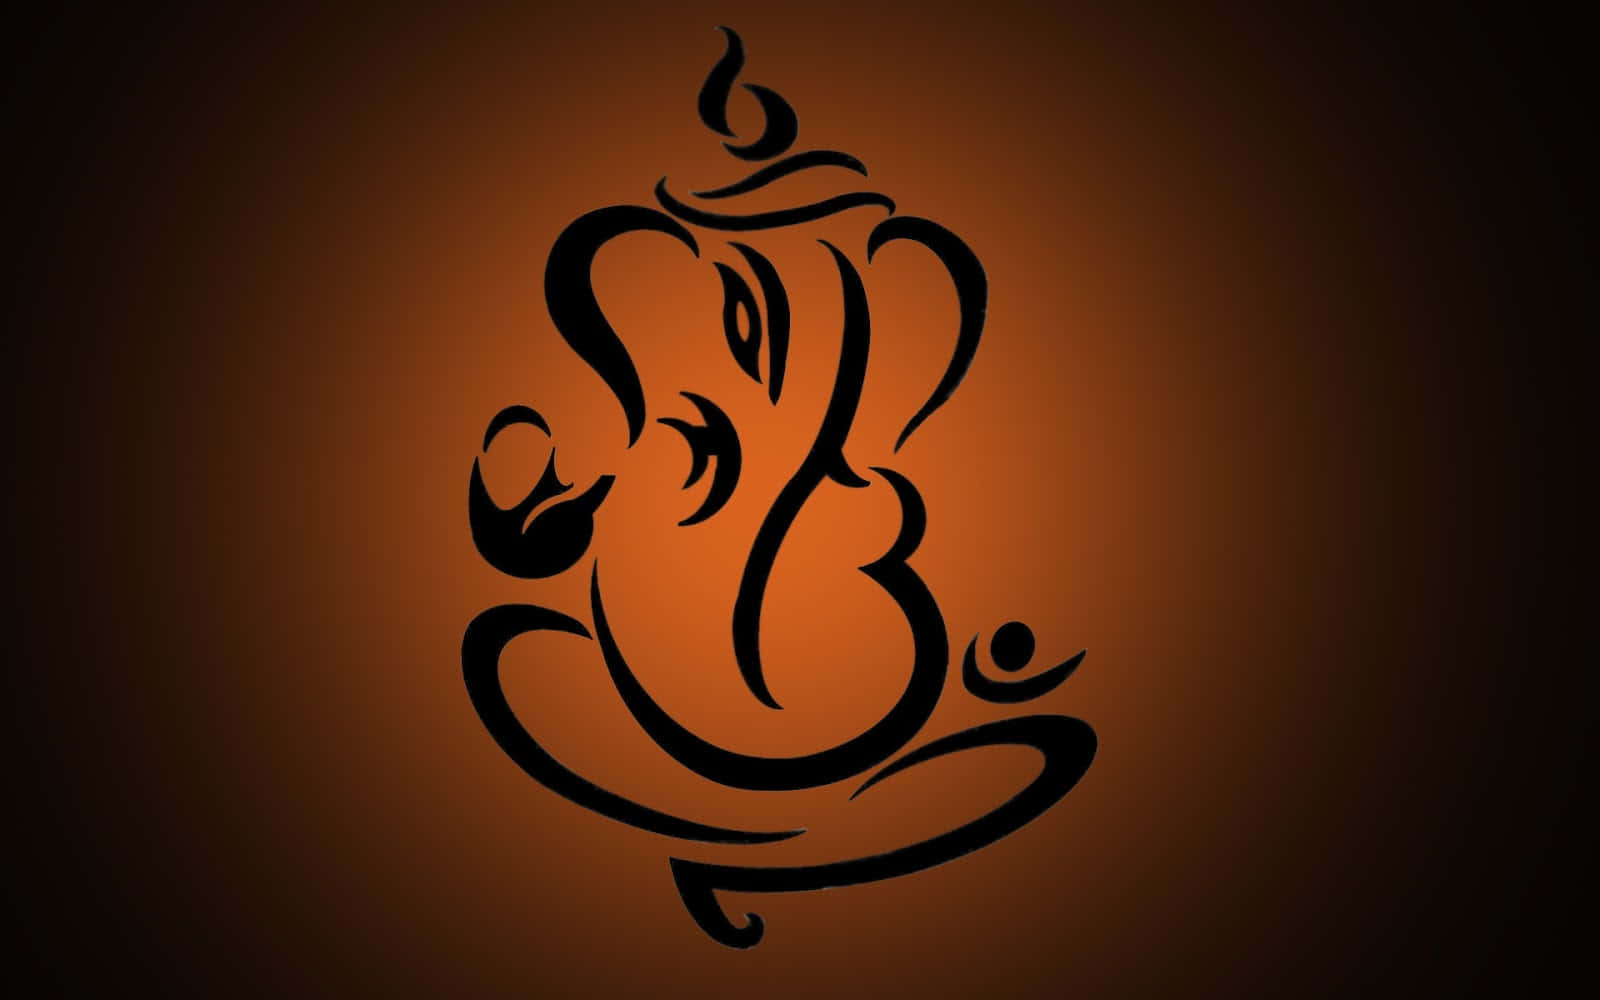 Celebrate Lord Ganesh, Lord of New Beginnings